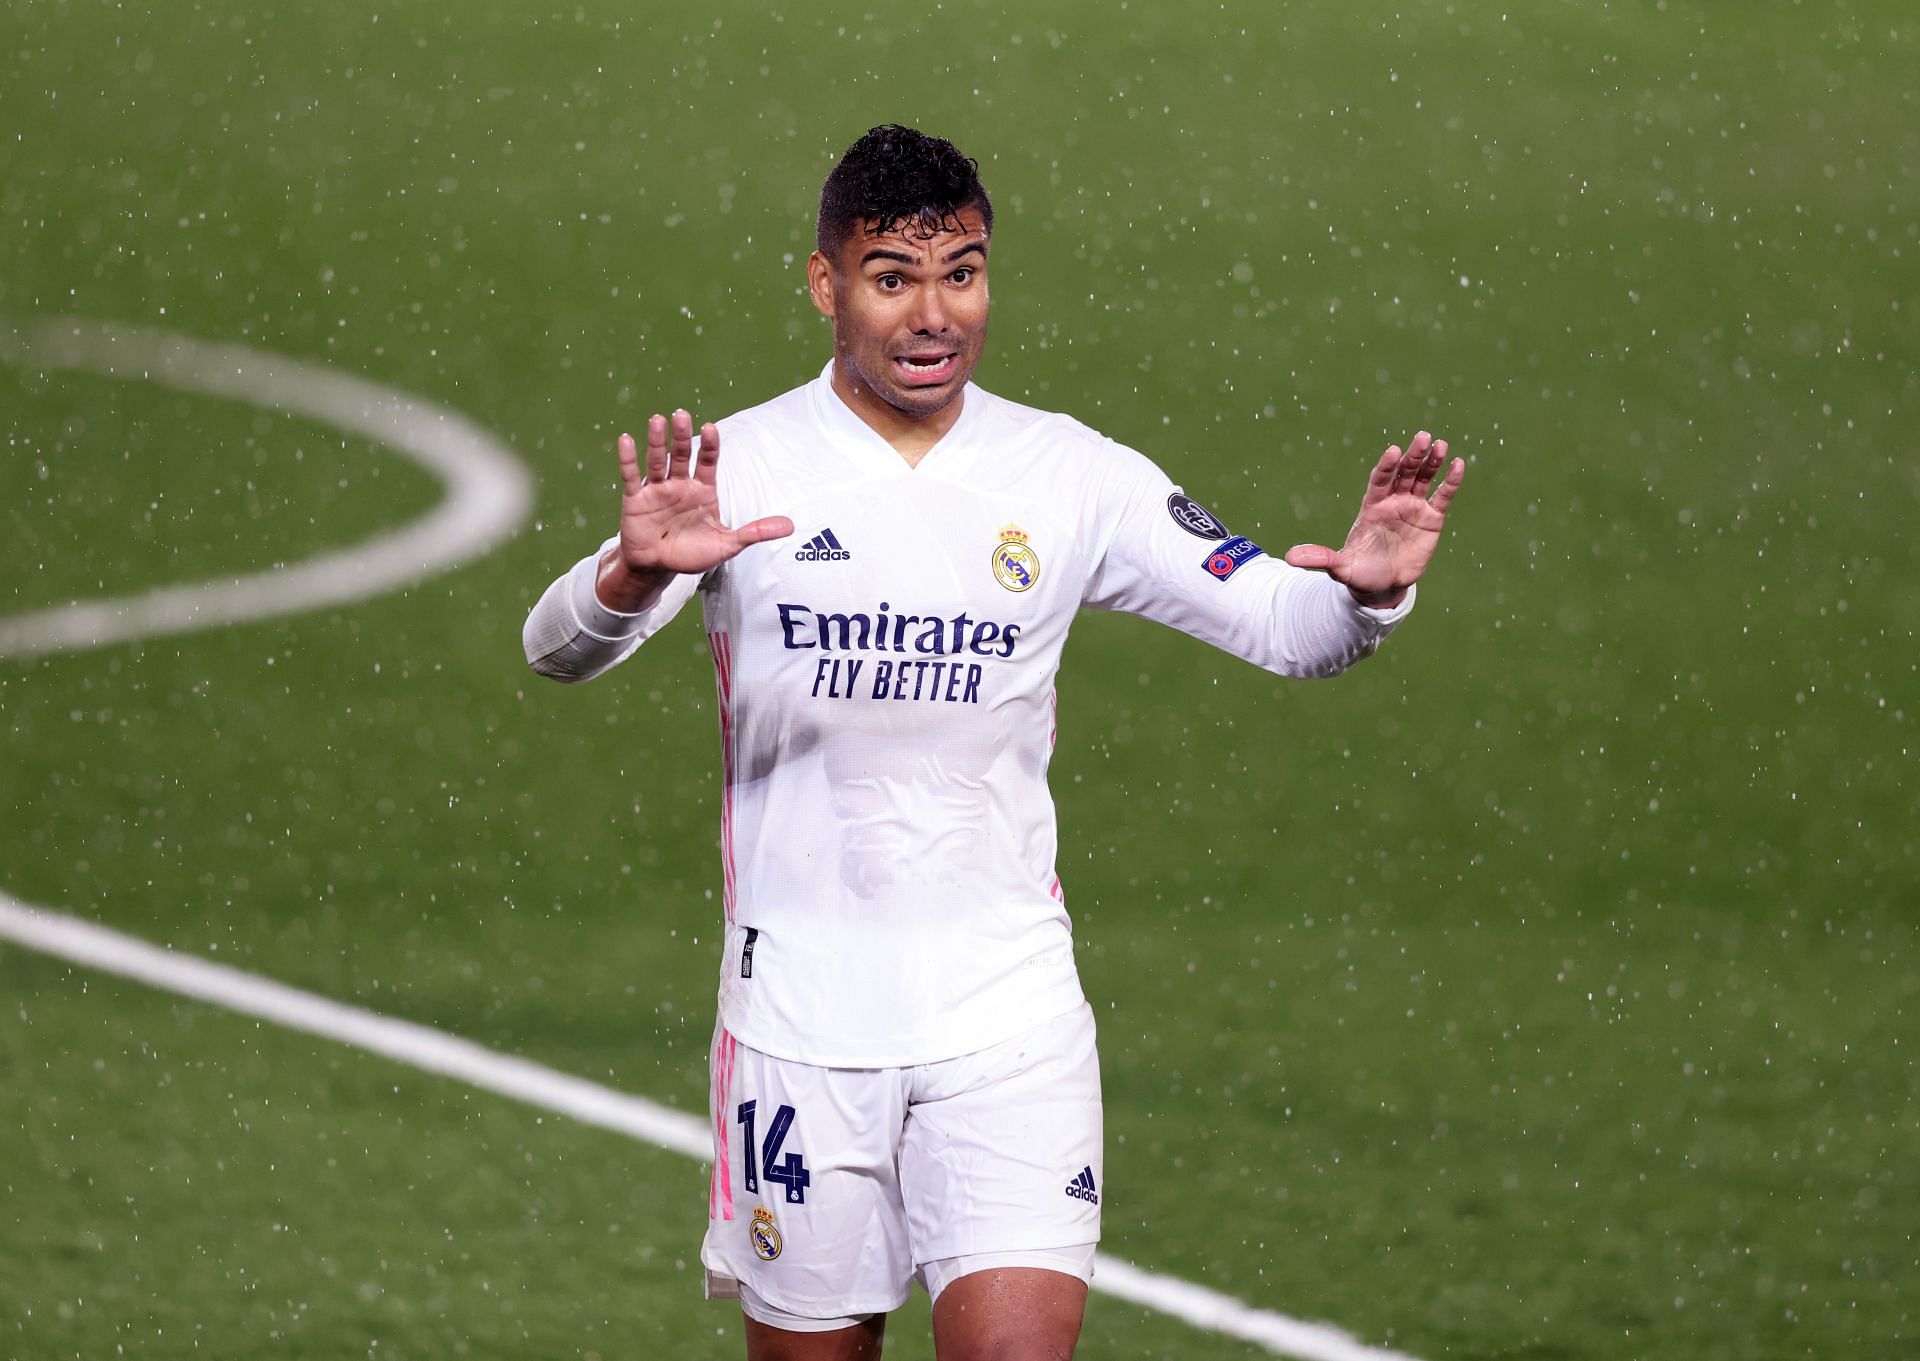 Casemiro has been a key player for Real Madrid over the years.